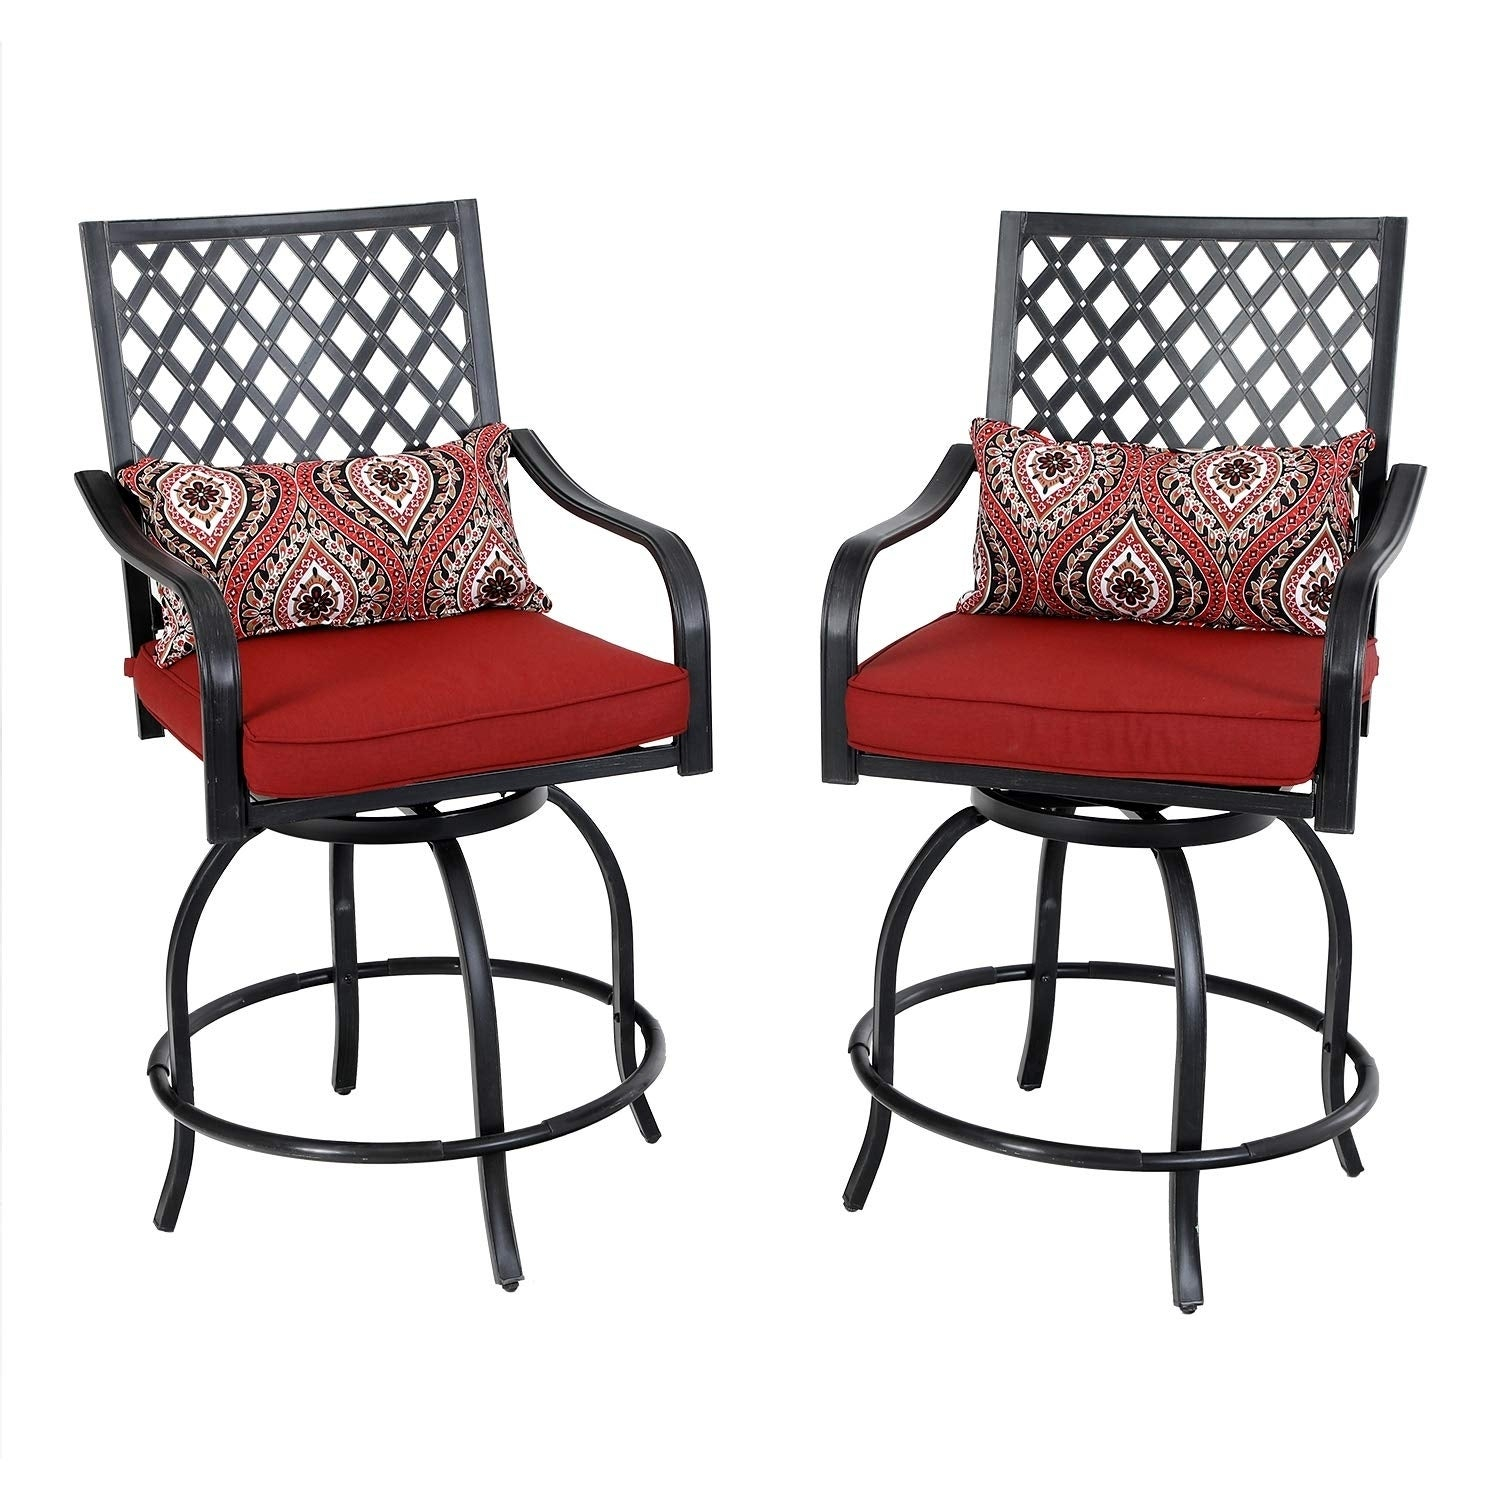 Wrought Iron Black Swivel Patio Bar Chairs (2-pack) • Fence Ideas Site